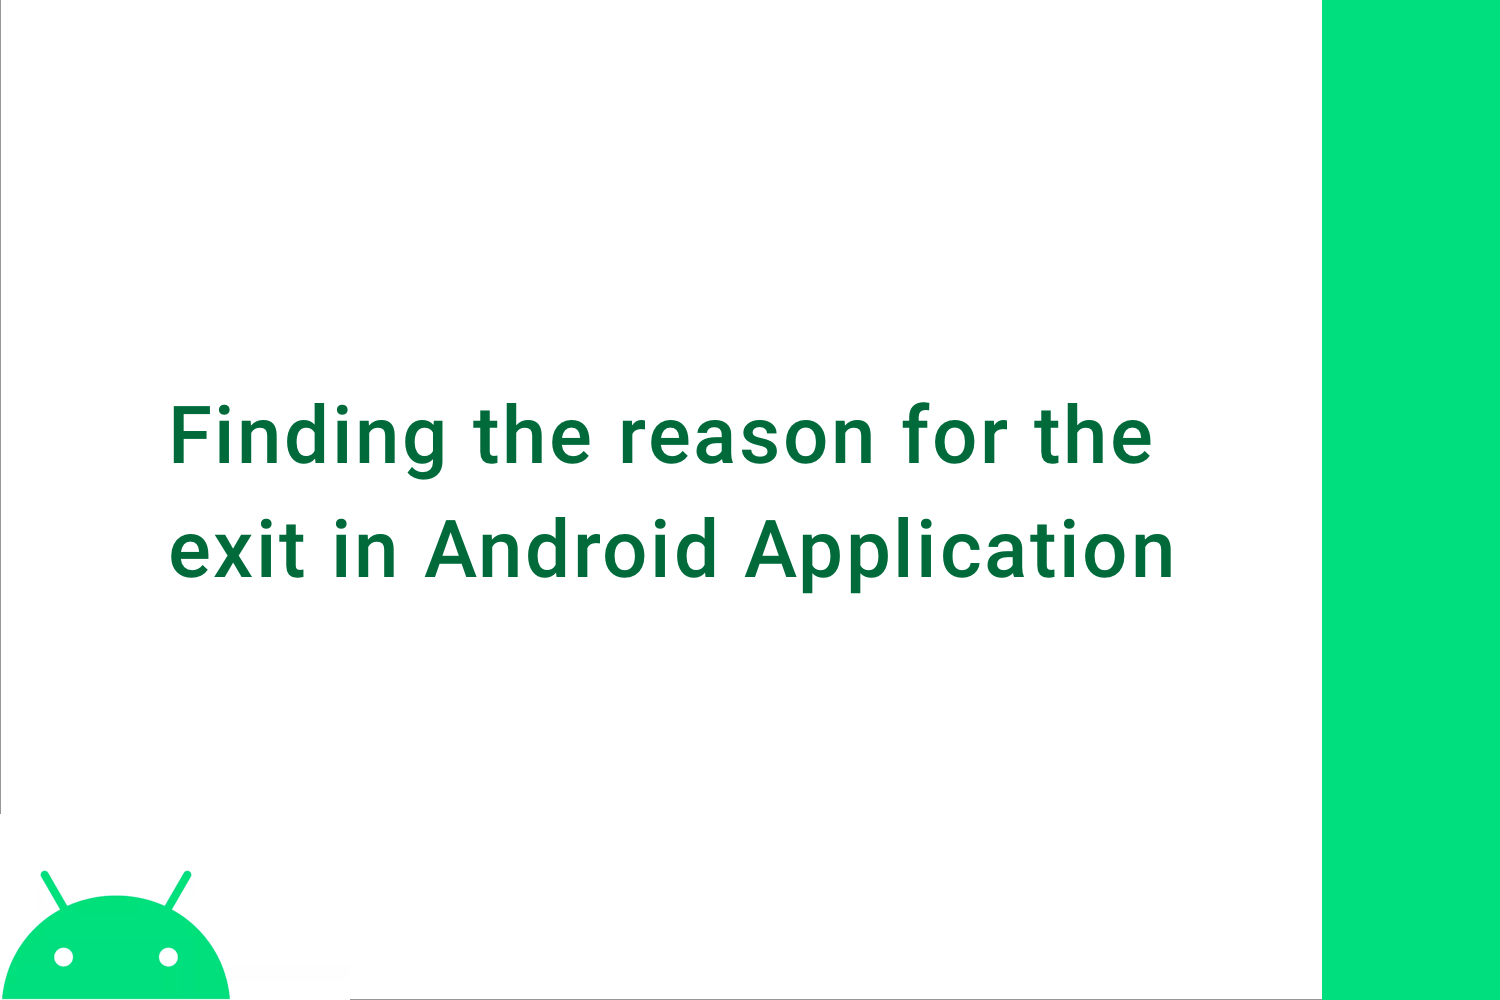 Finding the reason of exit in Android Application